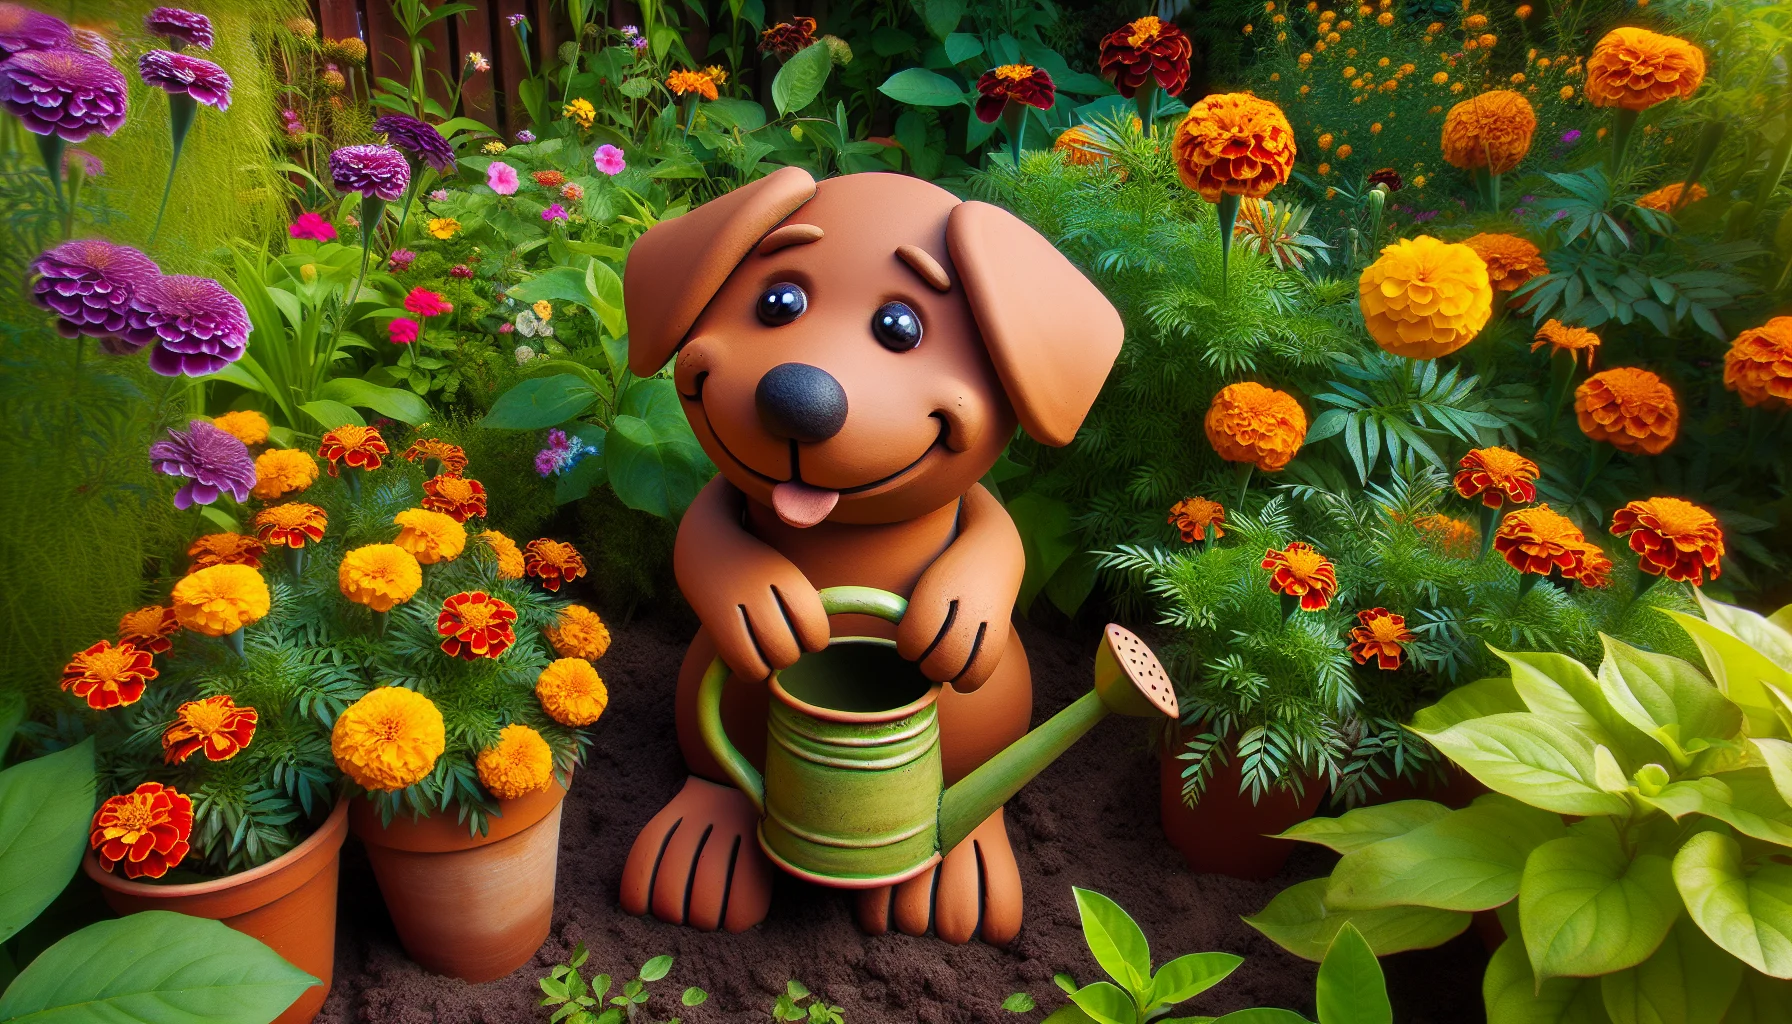 Generate a humorous and realistic image where a terracotta clay pot is creatively transformed into the shape of a cheerful dog. The setting is a lush backyard garden filled with bright flowers and thriving plants. The clay pot dog is whimsically placed among the foliage, amusingly attempting to 'water' a patch of marigolds with a miniature watering can held in its clay paws. The vivid colors and funny scenario should inspire a feeling of joy and entice viewers to take up the hobby of gardening.